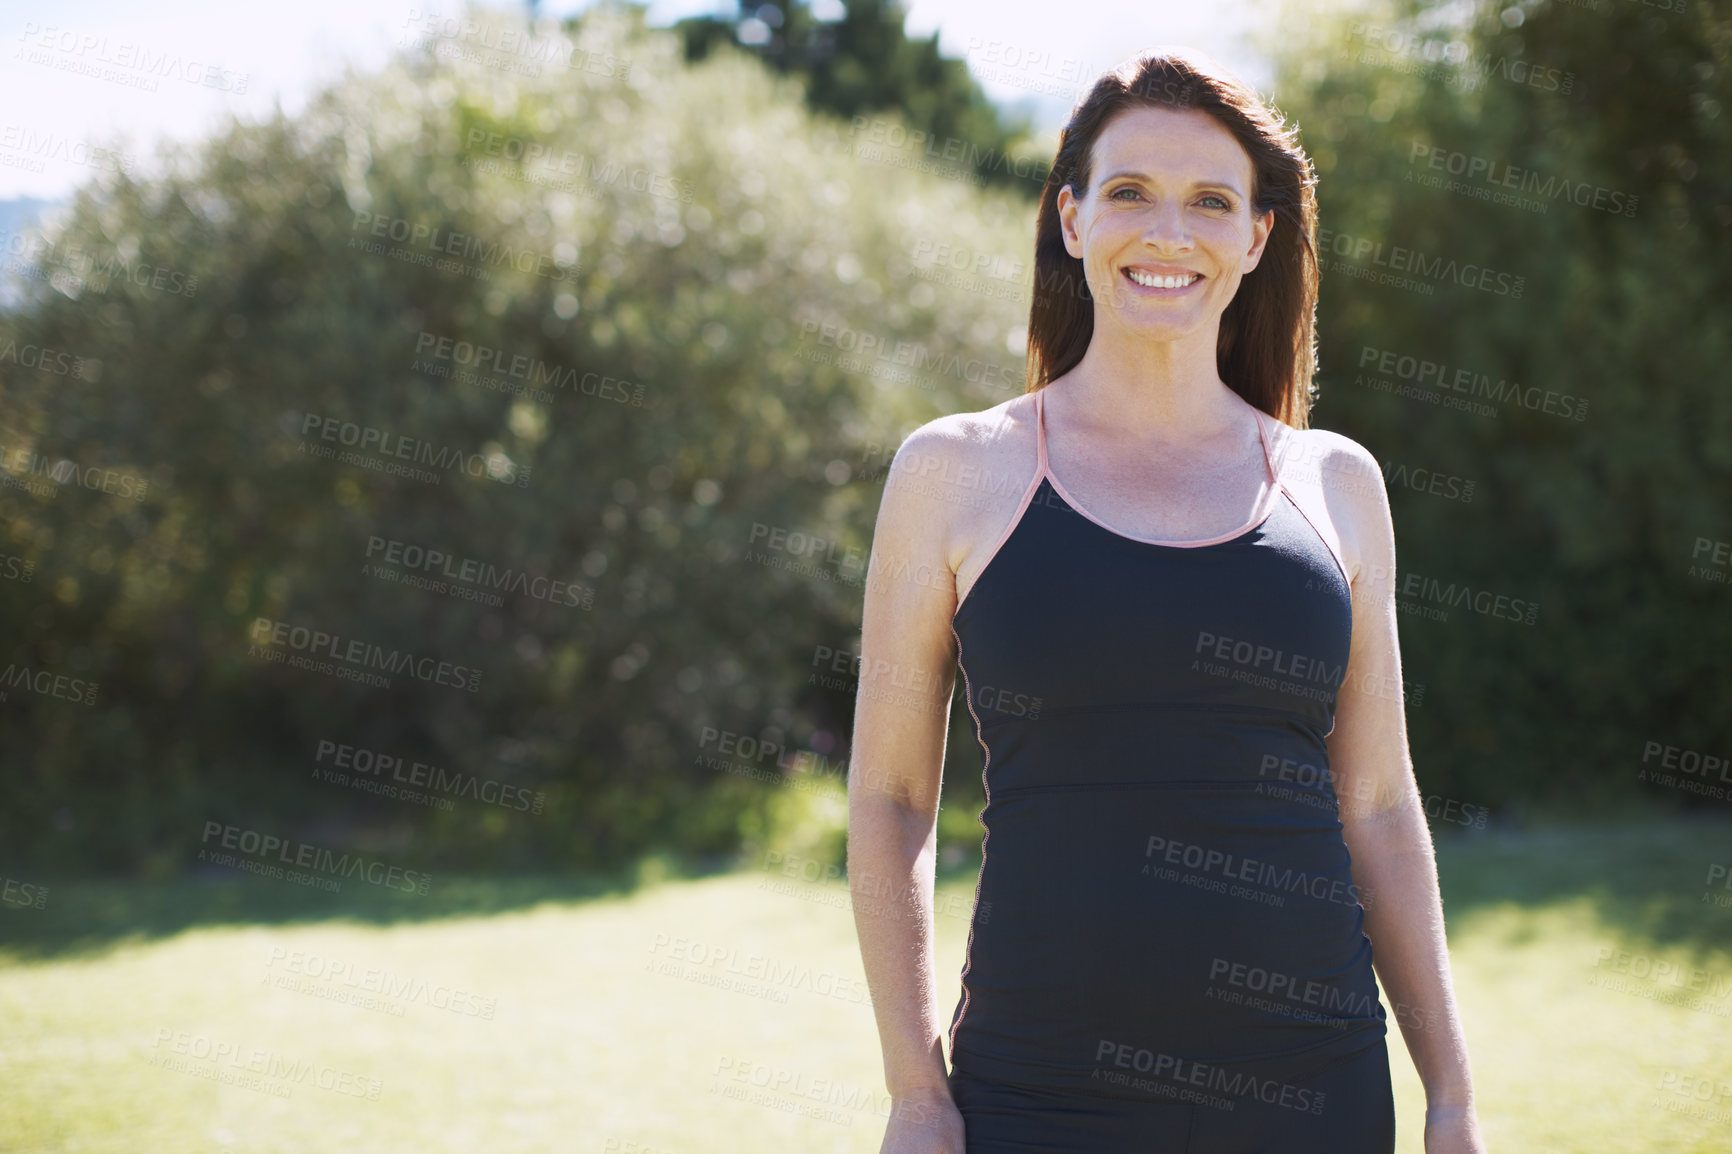 Buy stock photo An attractive woman in sports clothing smiling while standing in the outdoors